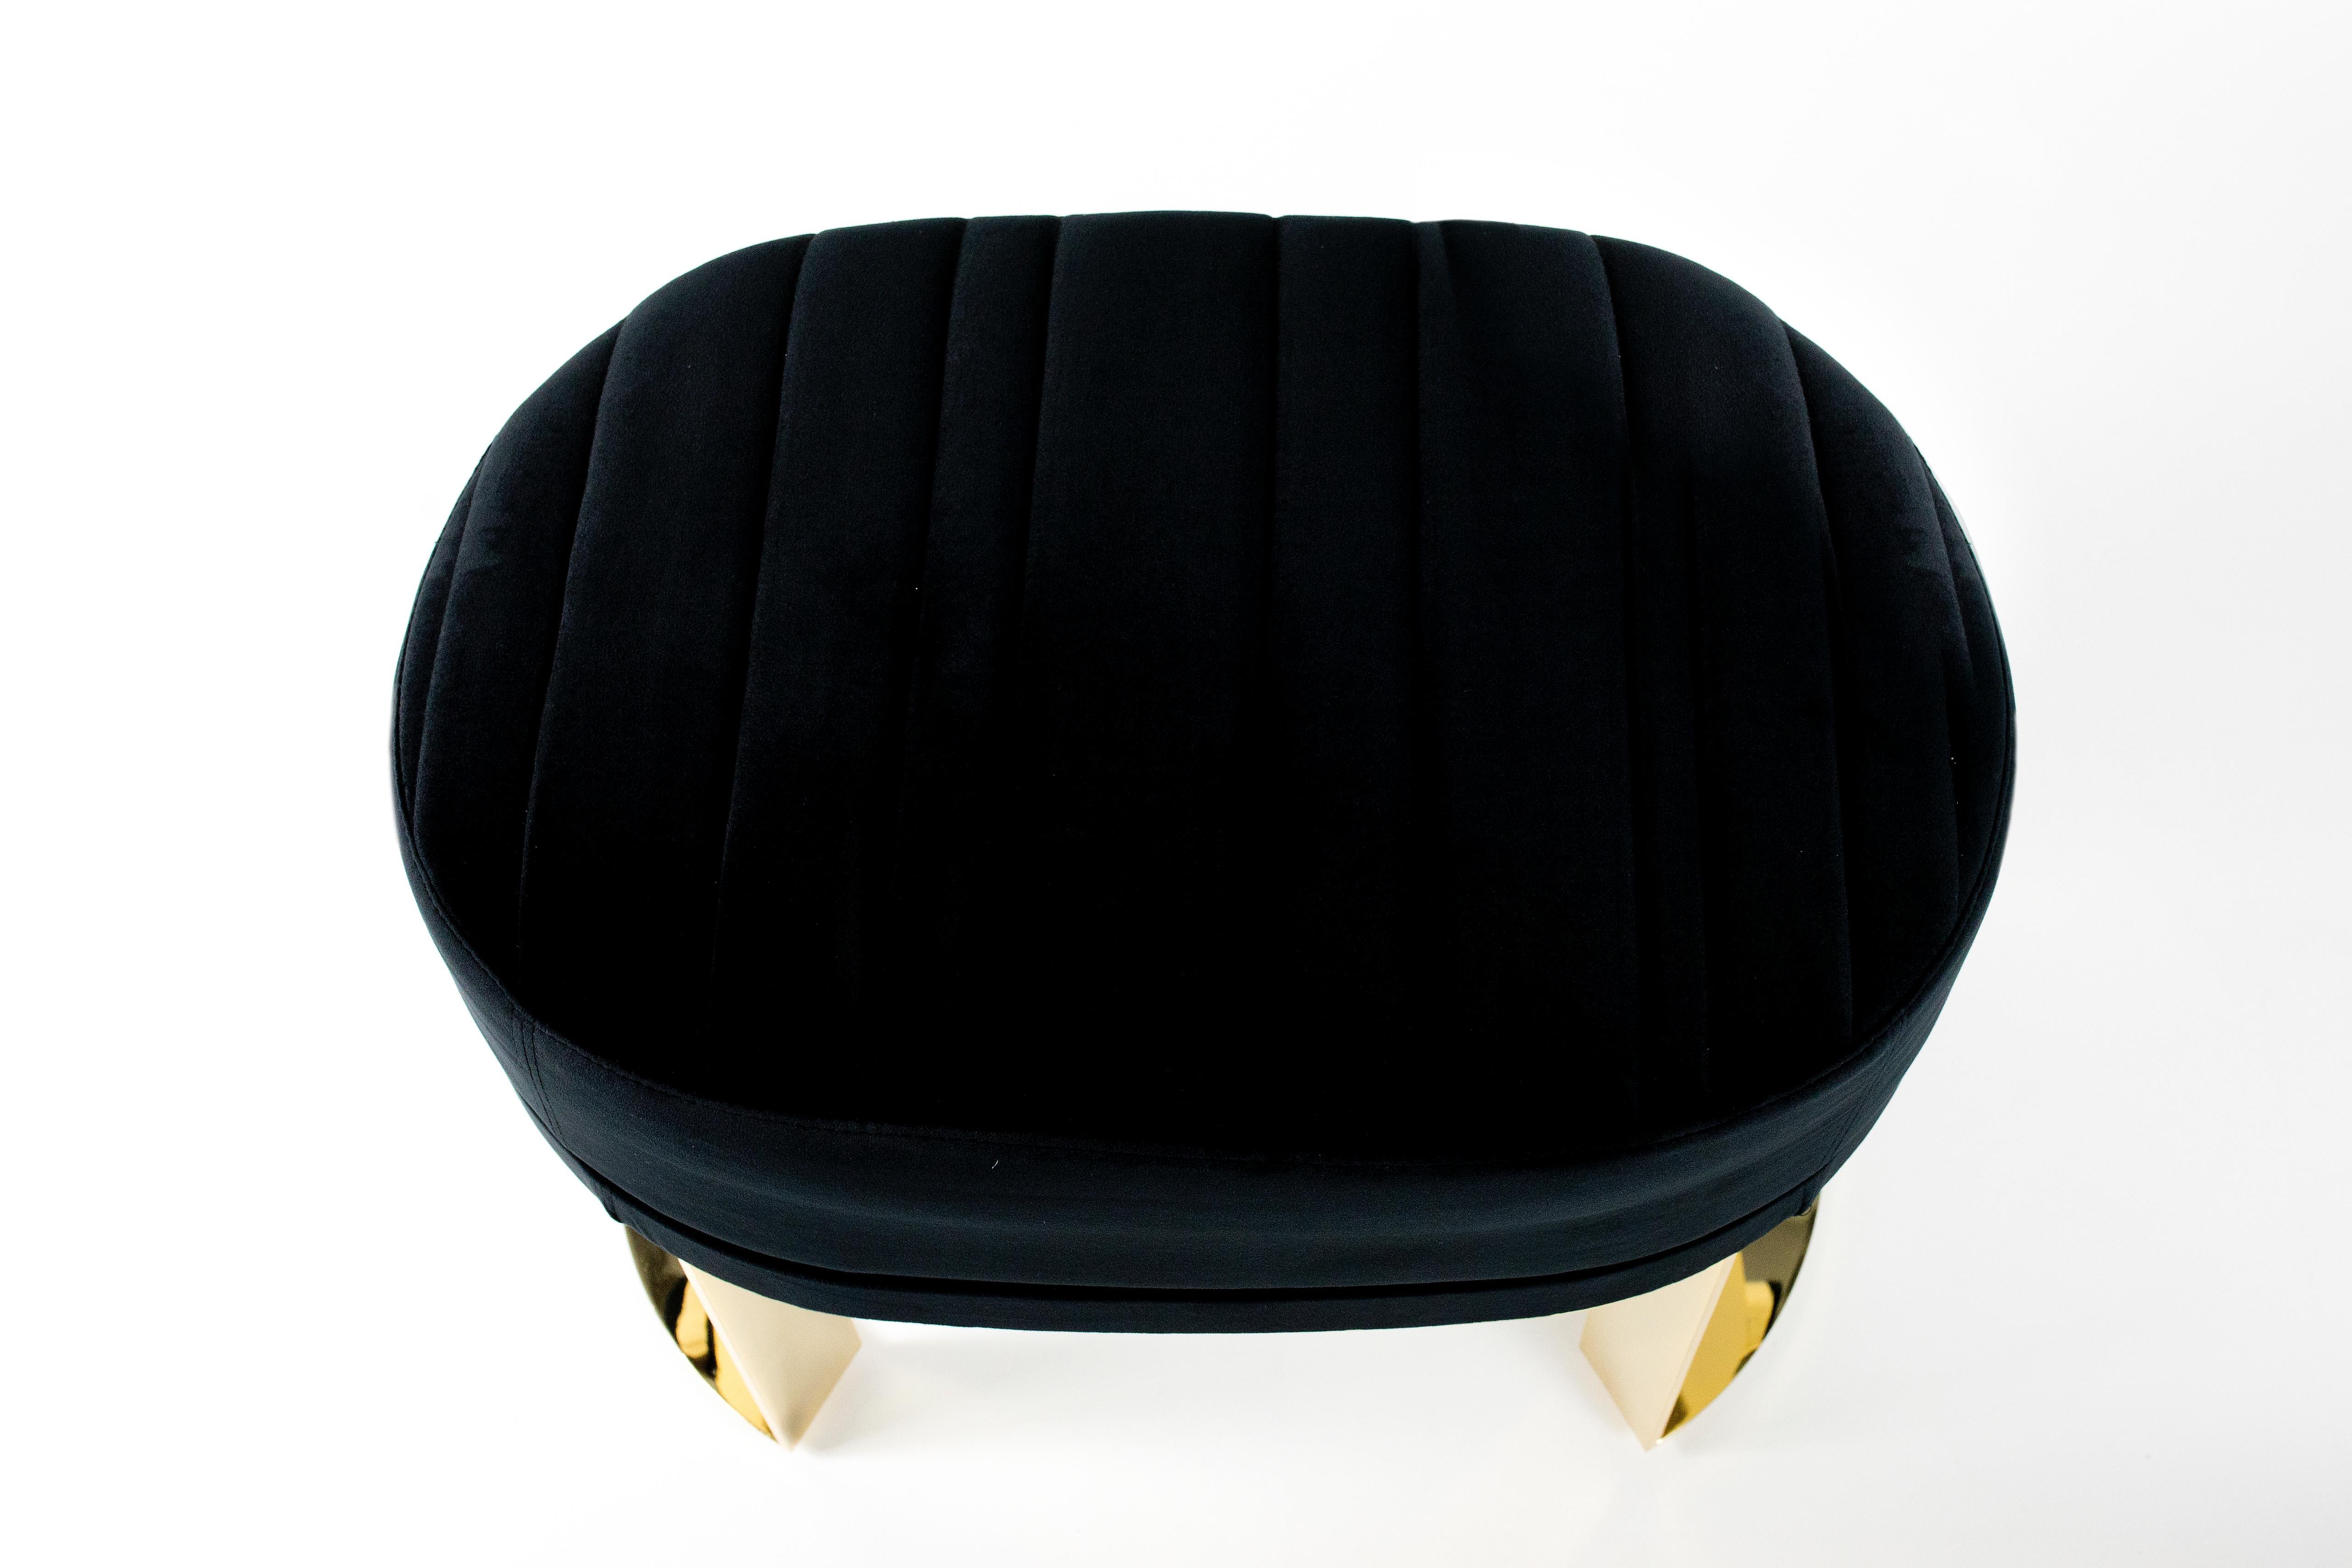 Spanish Upholstered Stool, Gold Plated Legs Bench For Sale